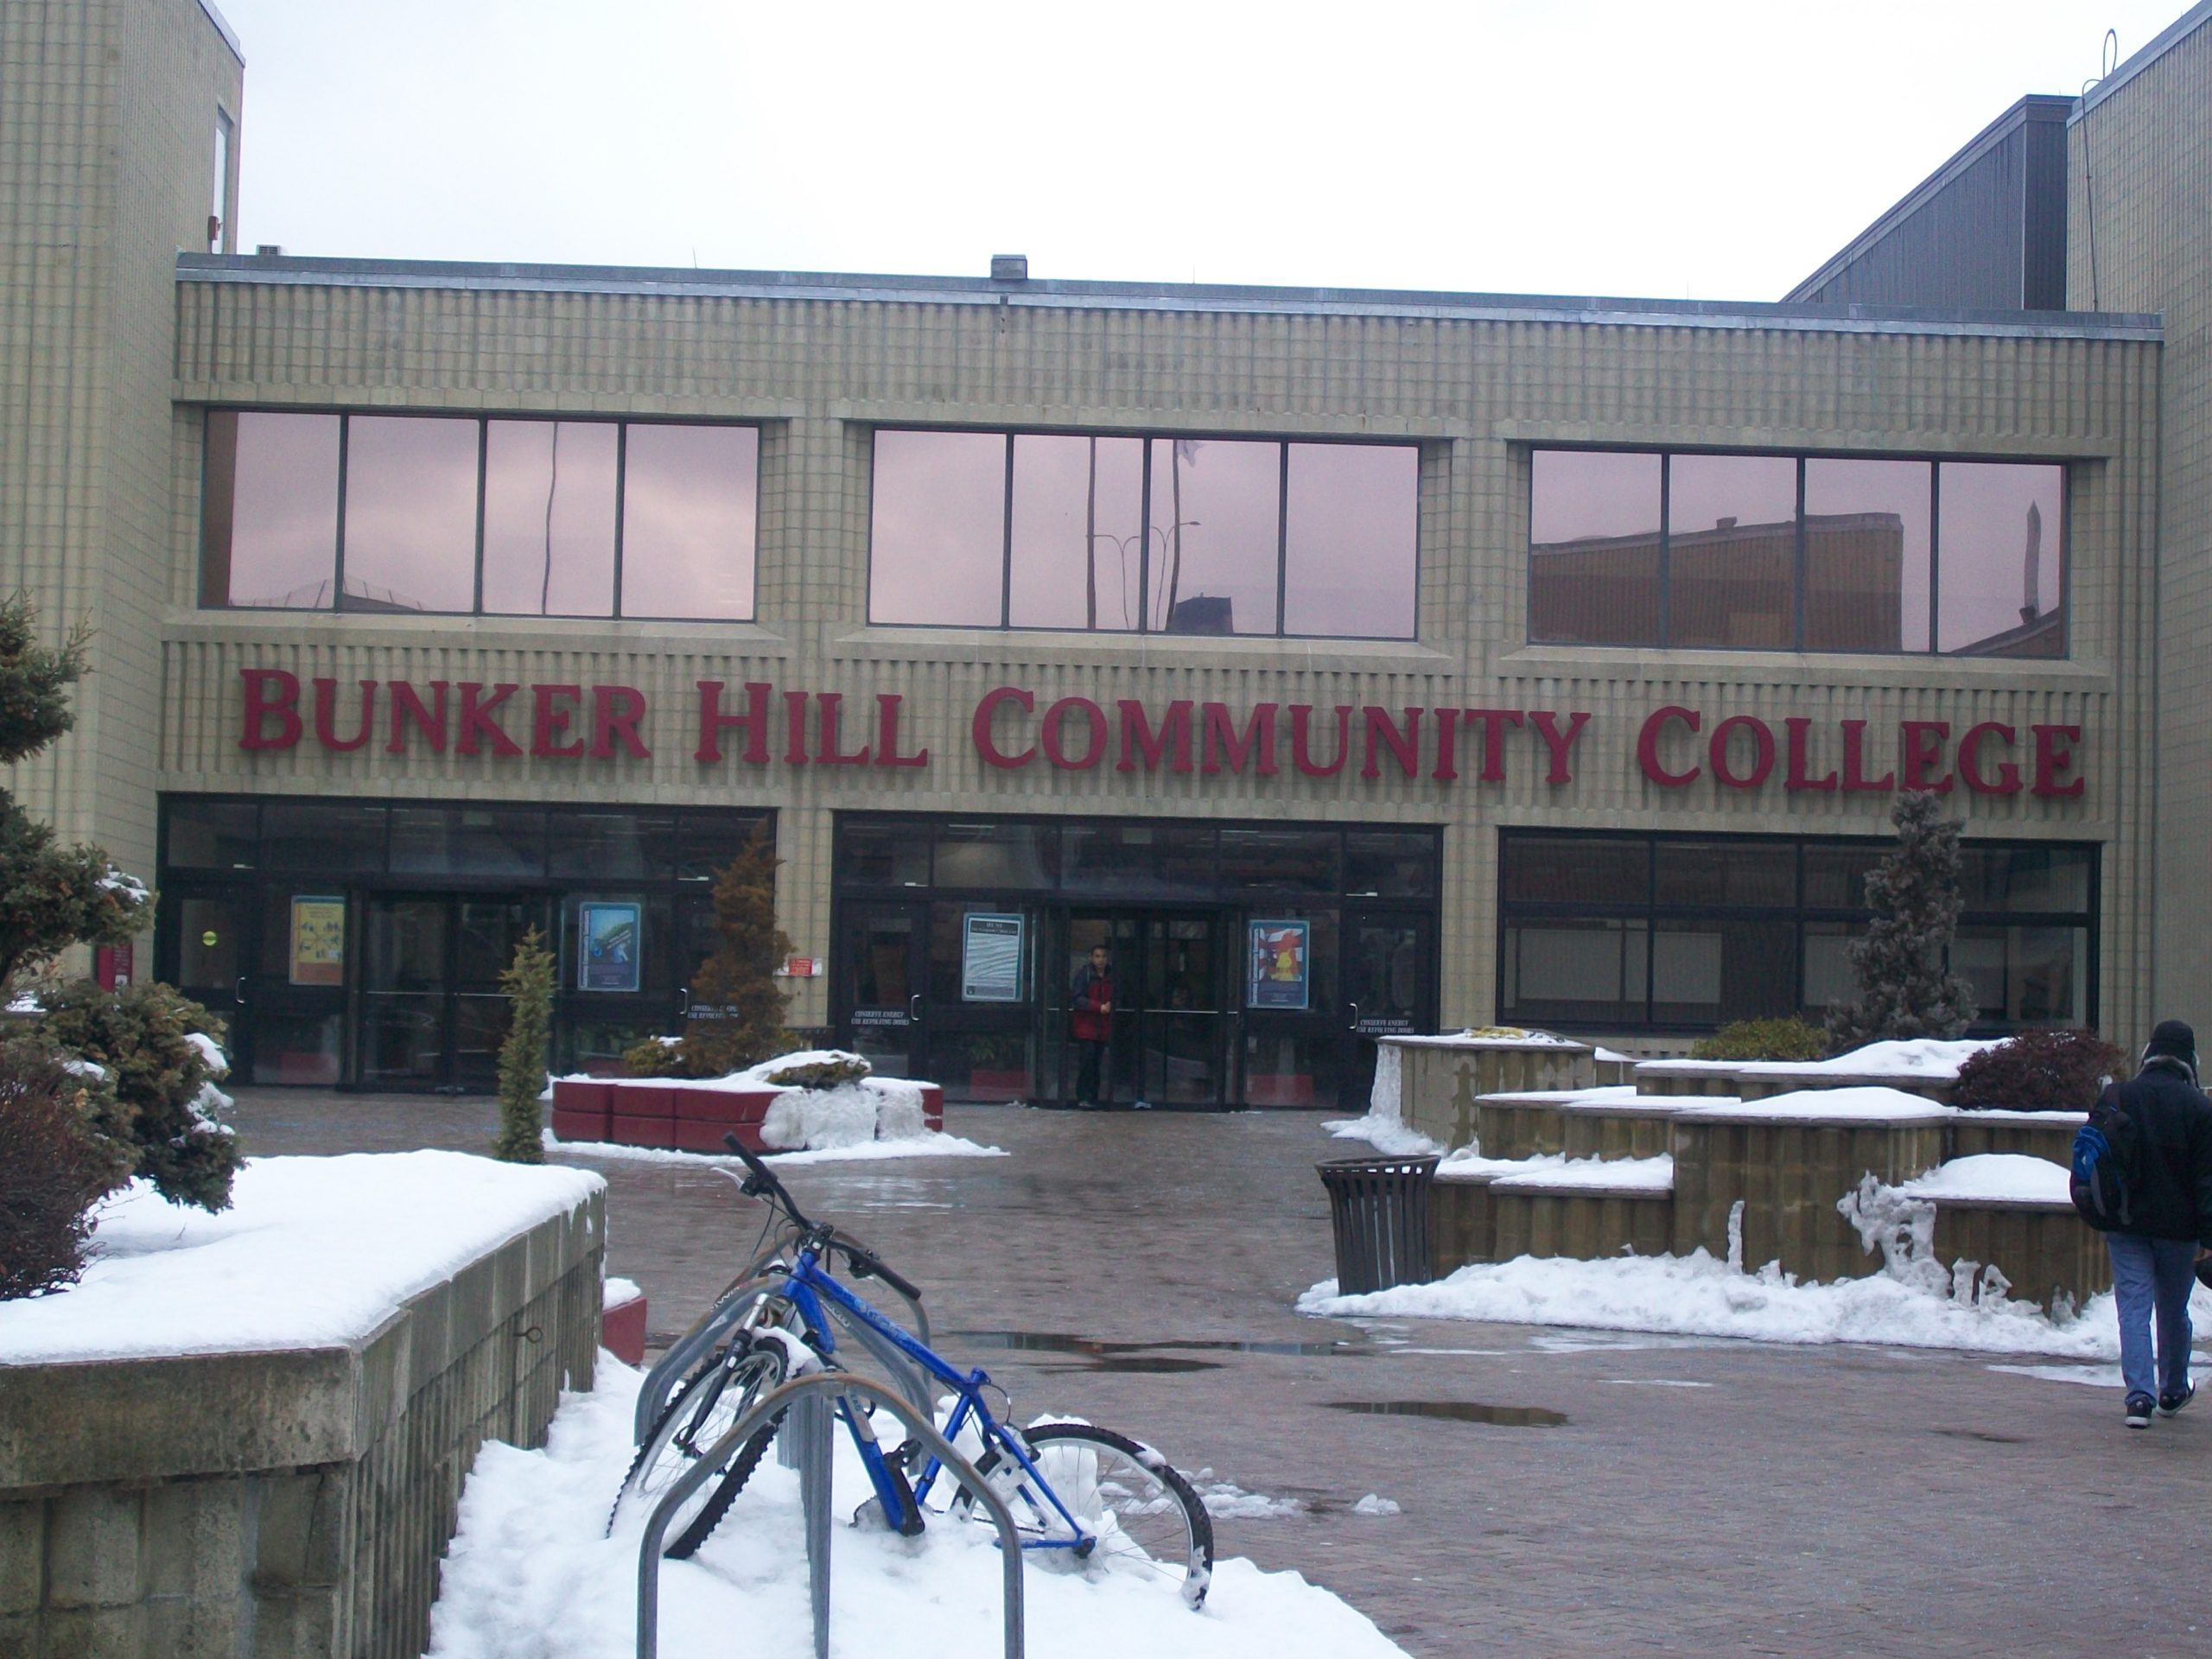                Everything about Bunker Hill Community College